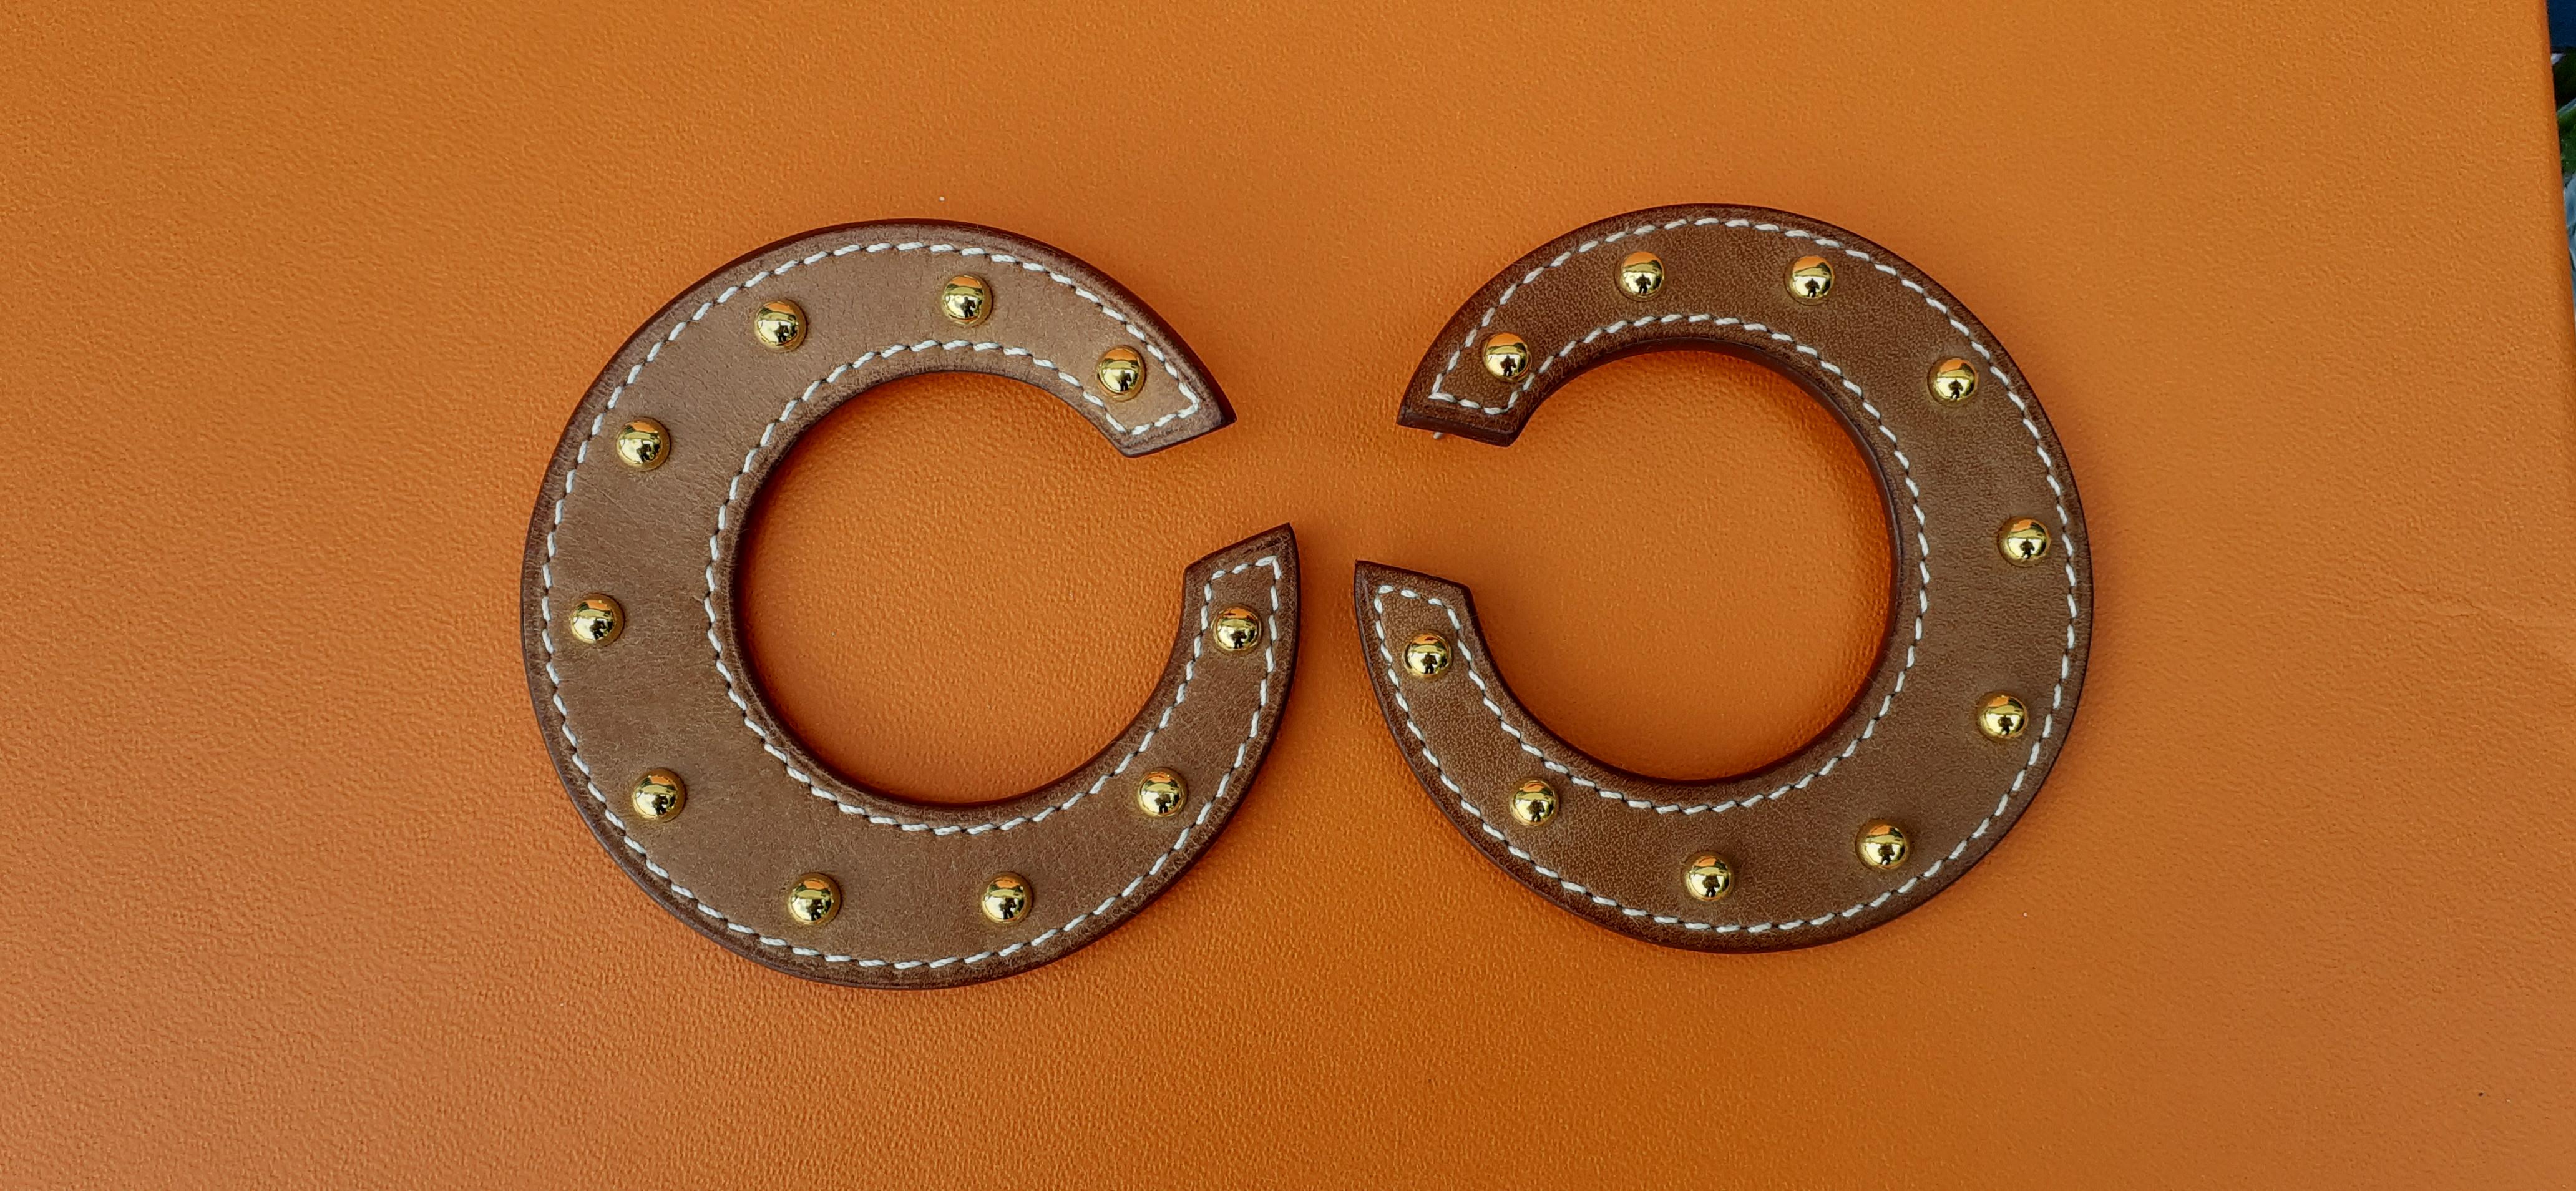 Beautiful Authentic Hermès Earrings

Shape: open round

For pierced ears

Made in France

Made of Barenia and Gold plated Hardware

Colorways: Brown, Golden, White stitching

